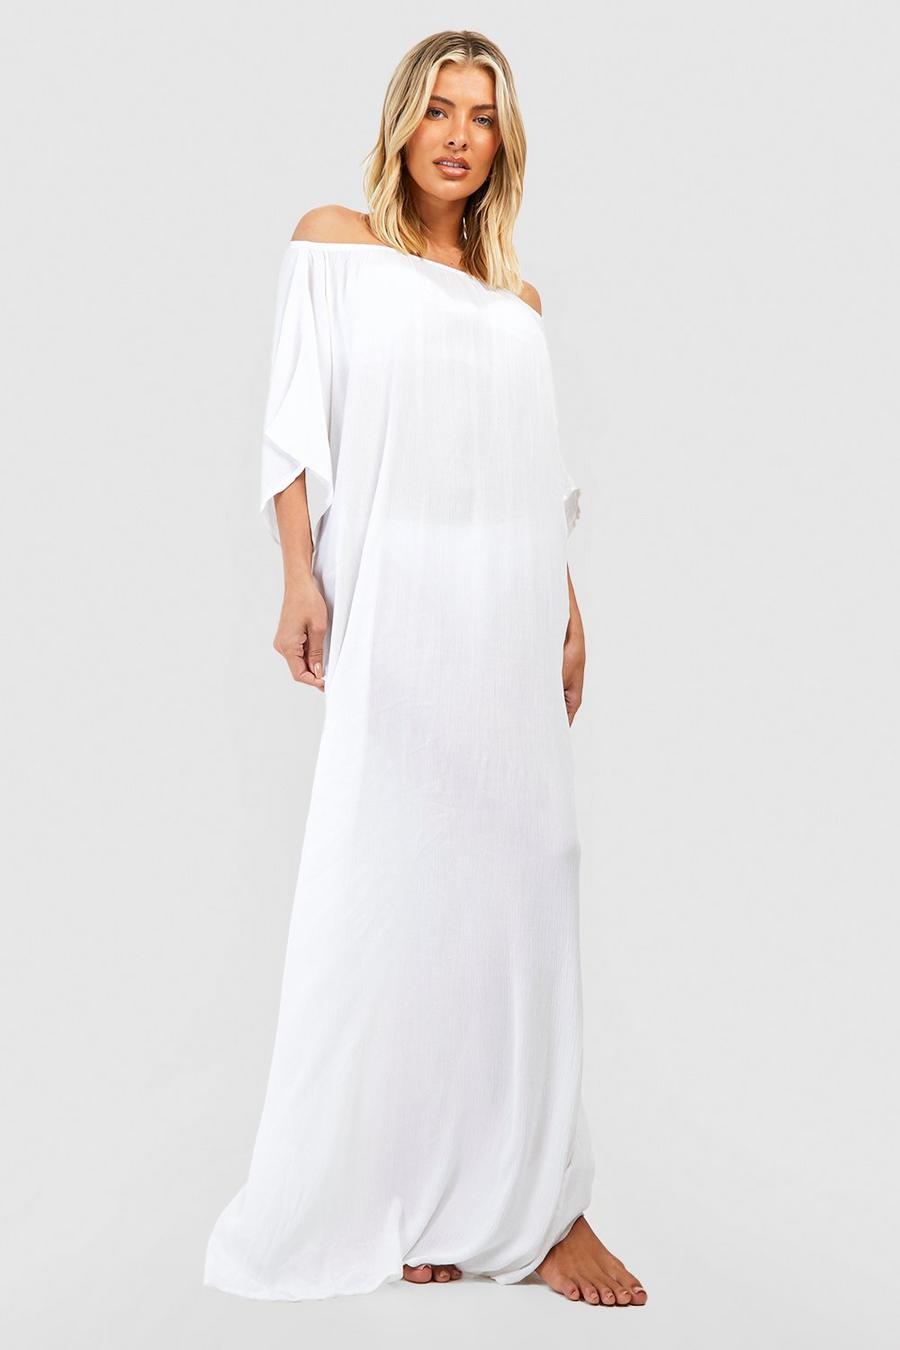 White Off The Shoulder Beach Maxi Dress image number 1